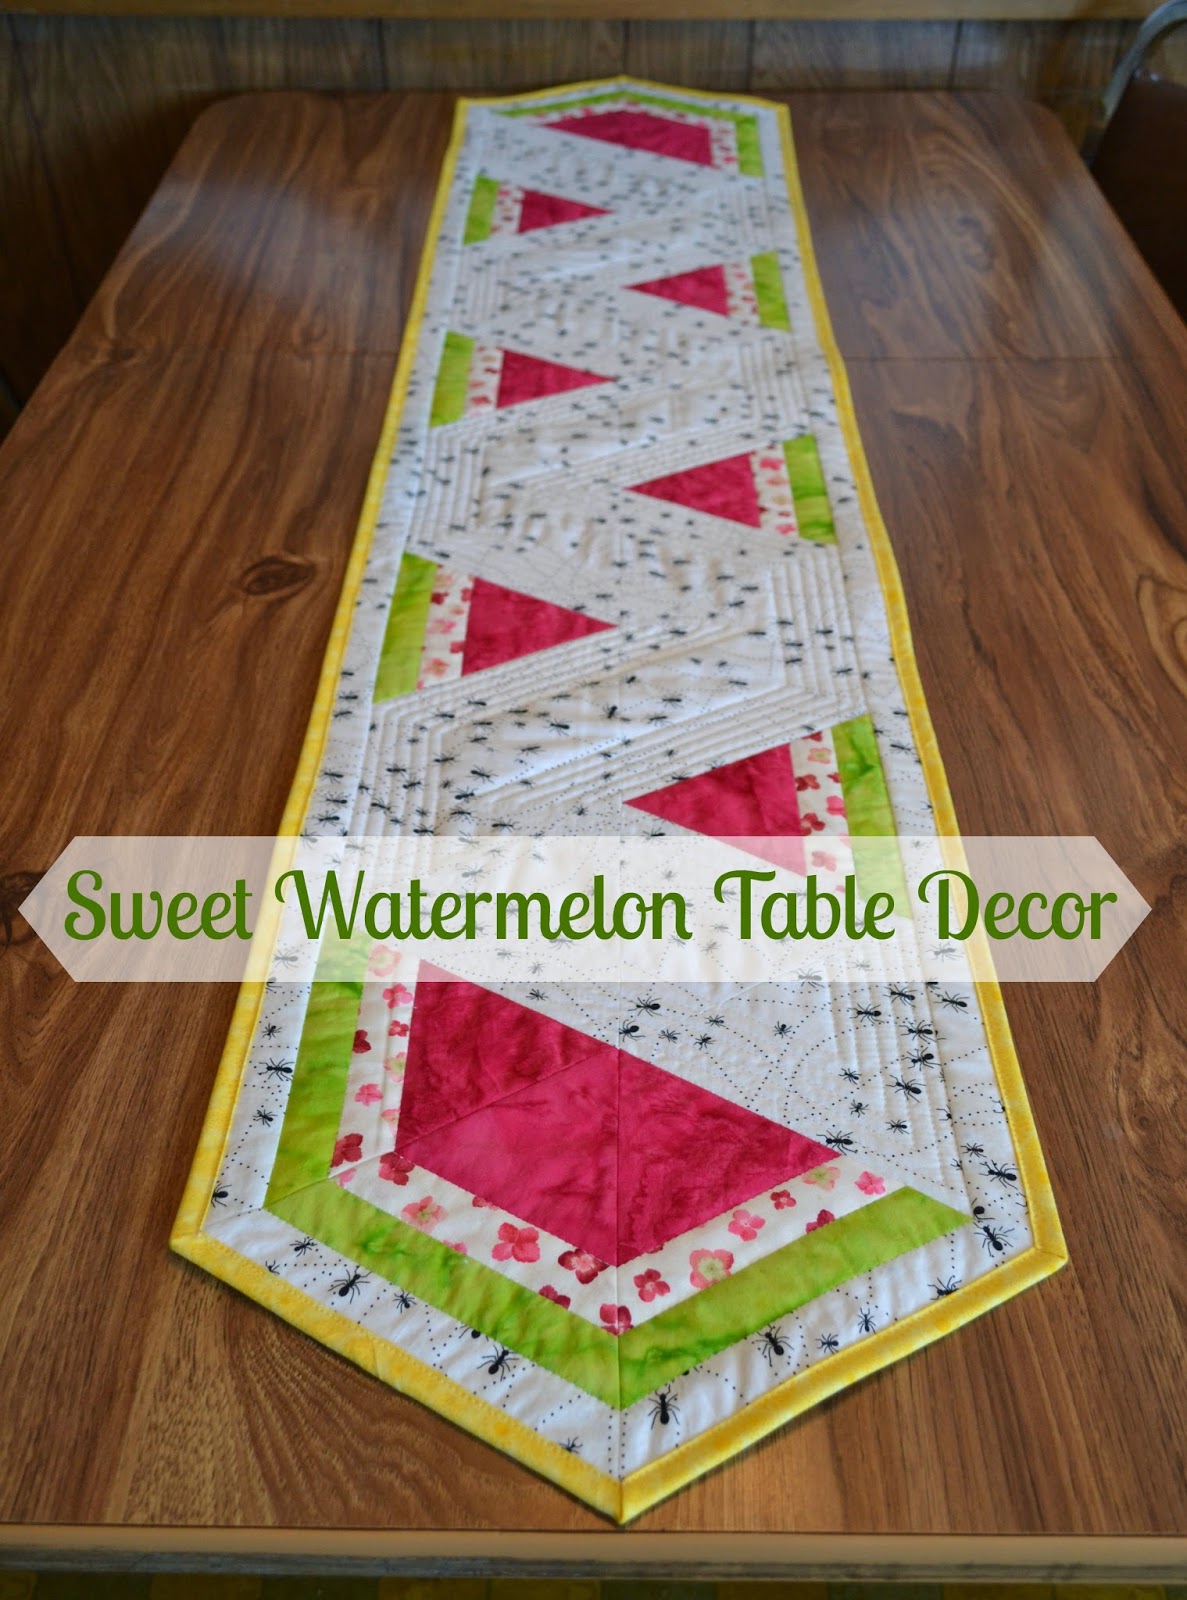 "Sweet Watermelon Table Decor" is a Free Table Top Quilted Pattern designed by Lorna of Sew Fresh Quilts from Sew Can She!